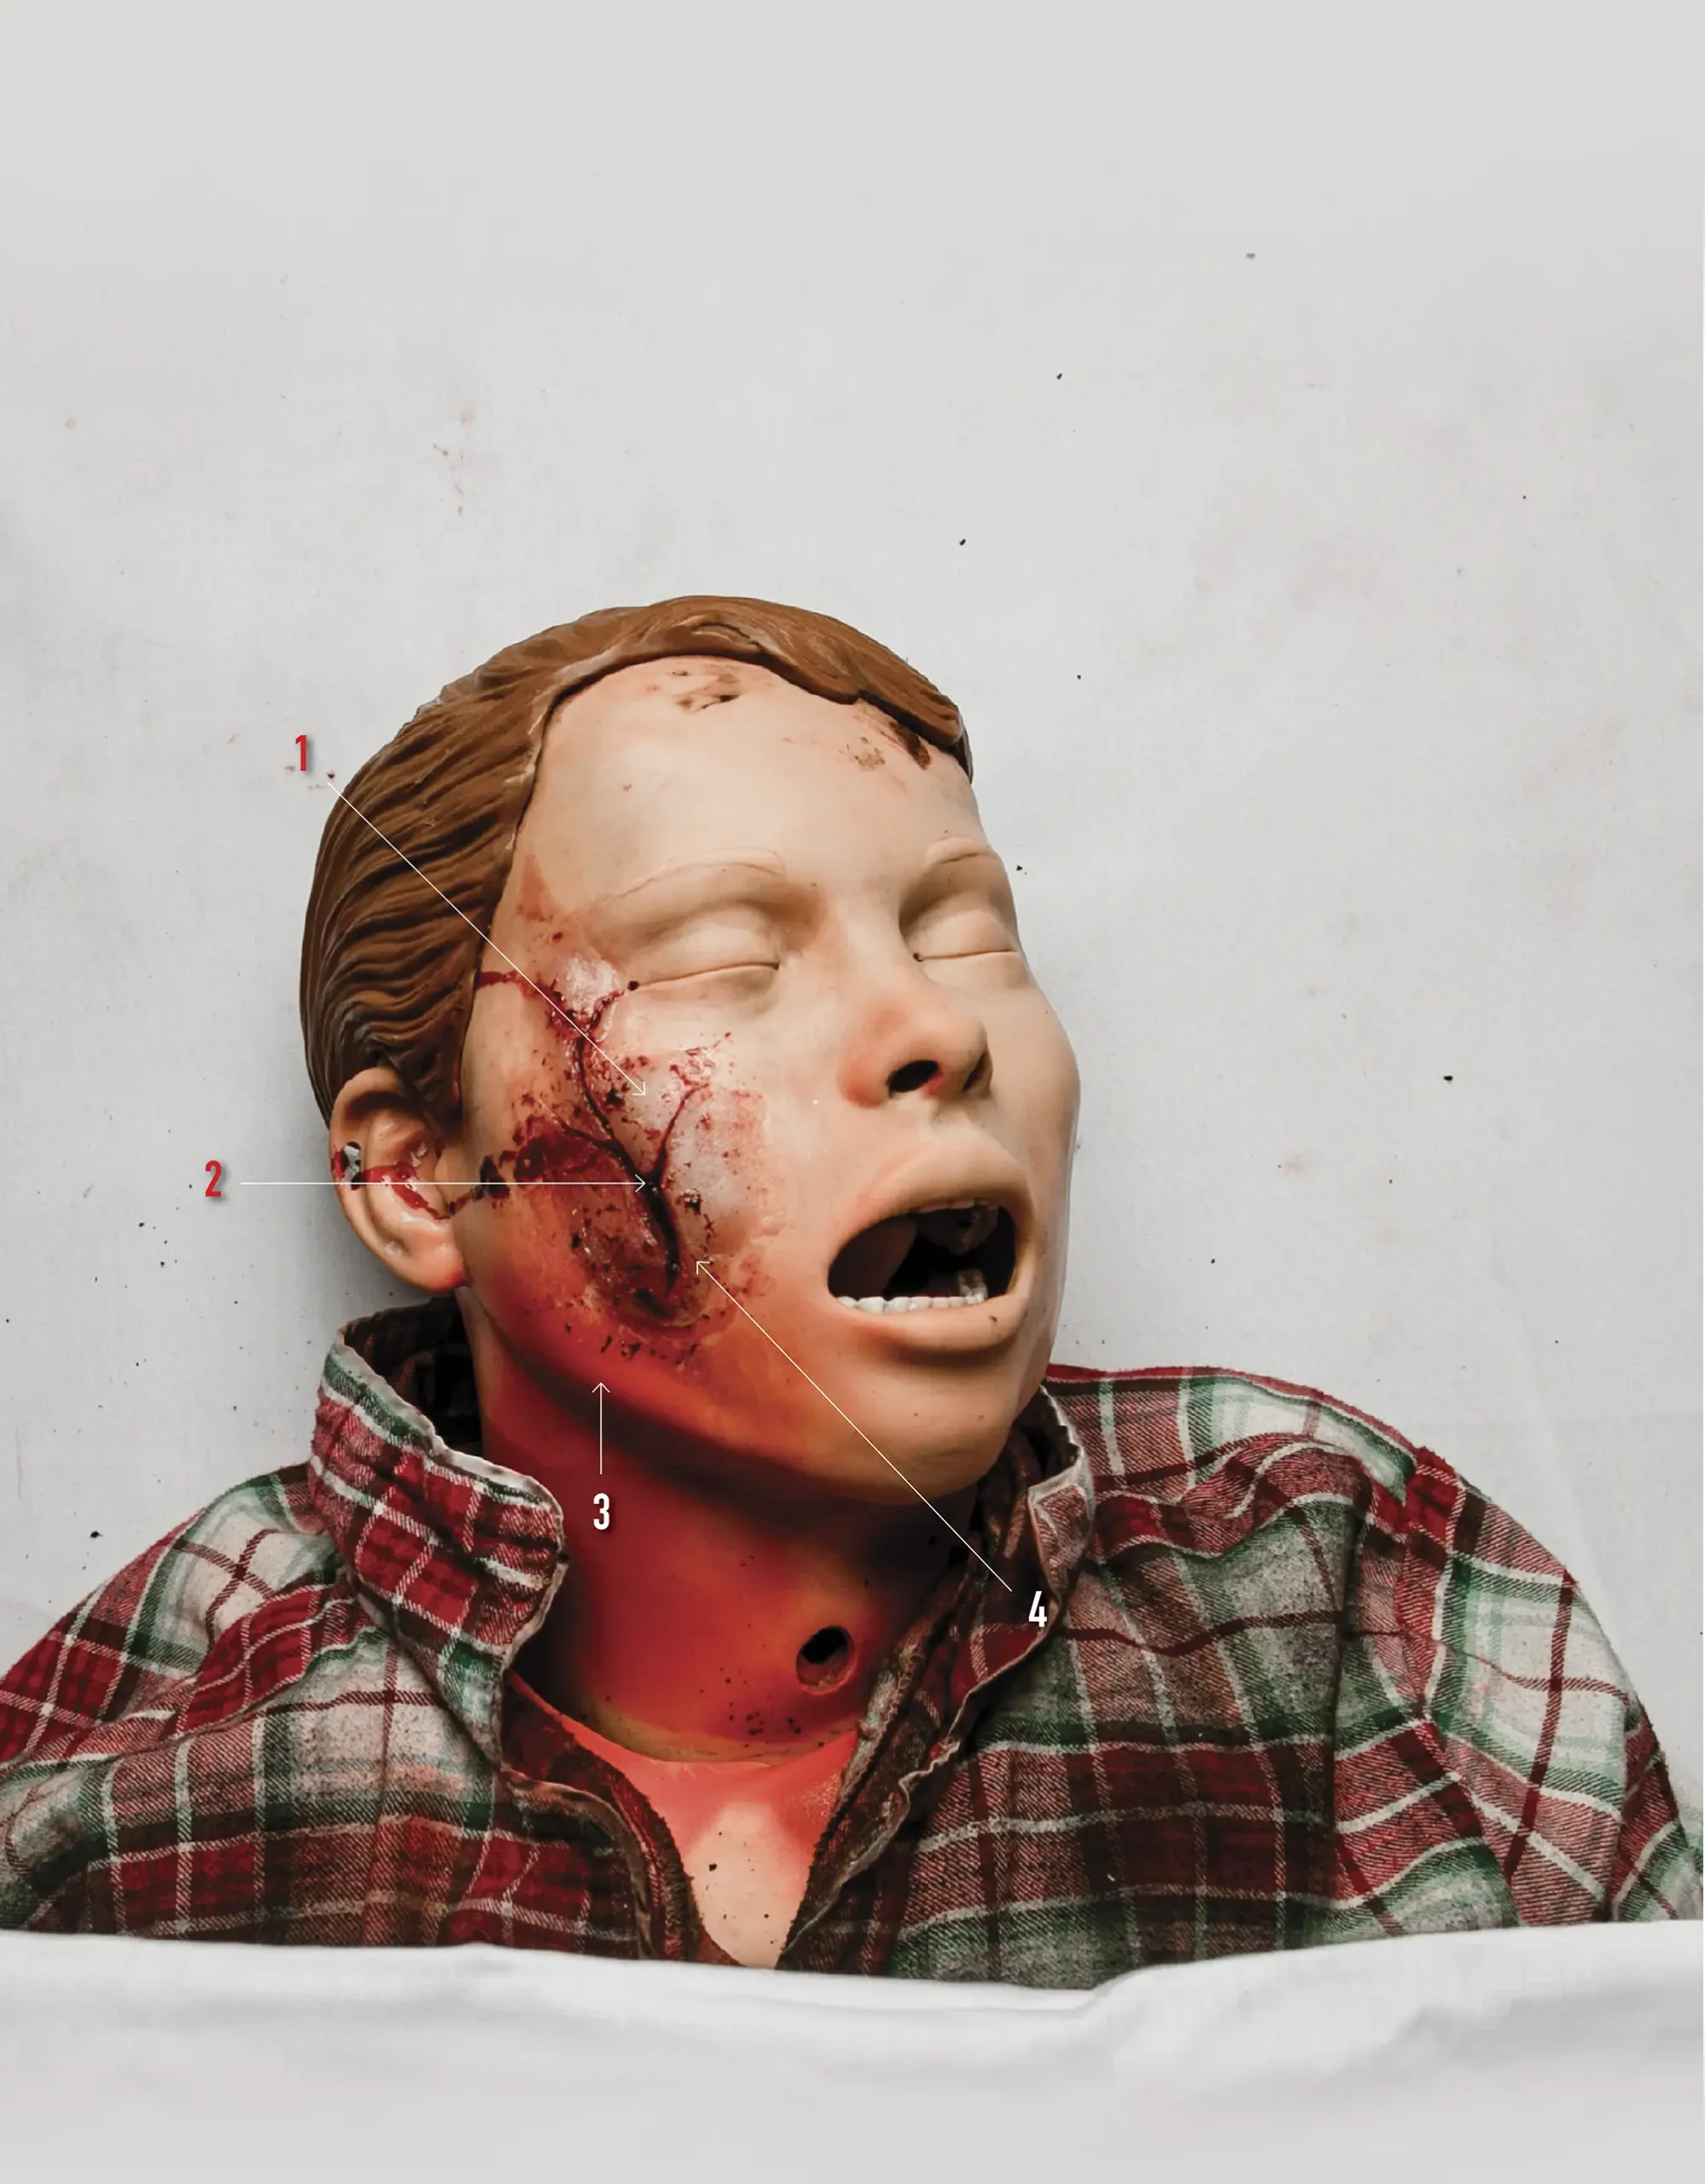 Latex dummy mannequin with special effects injuries on face